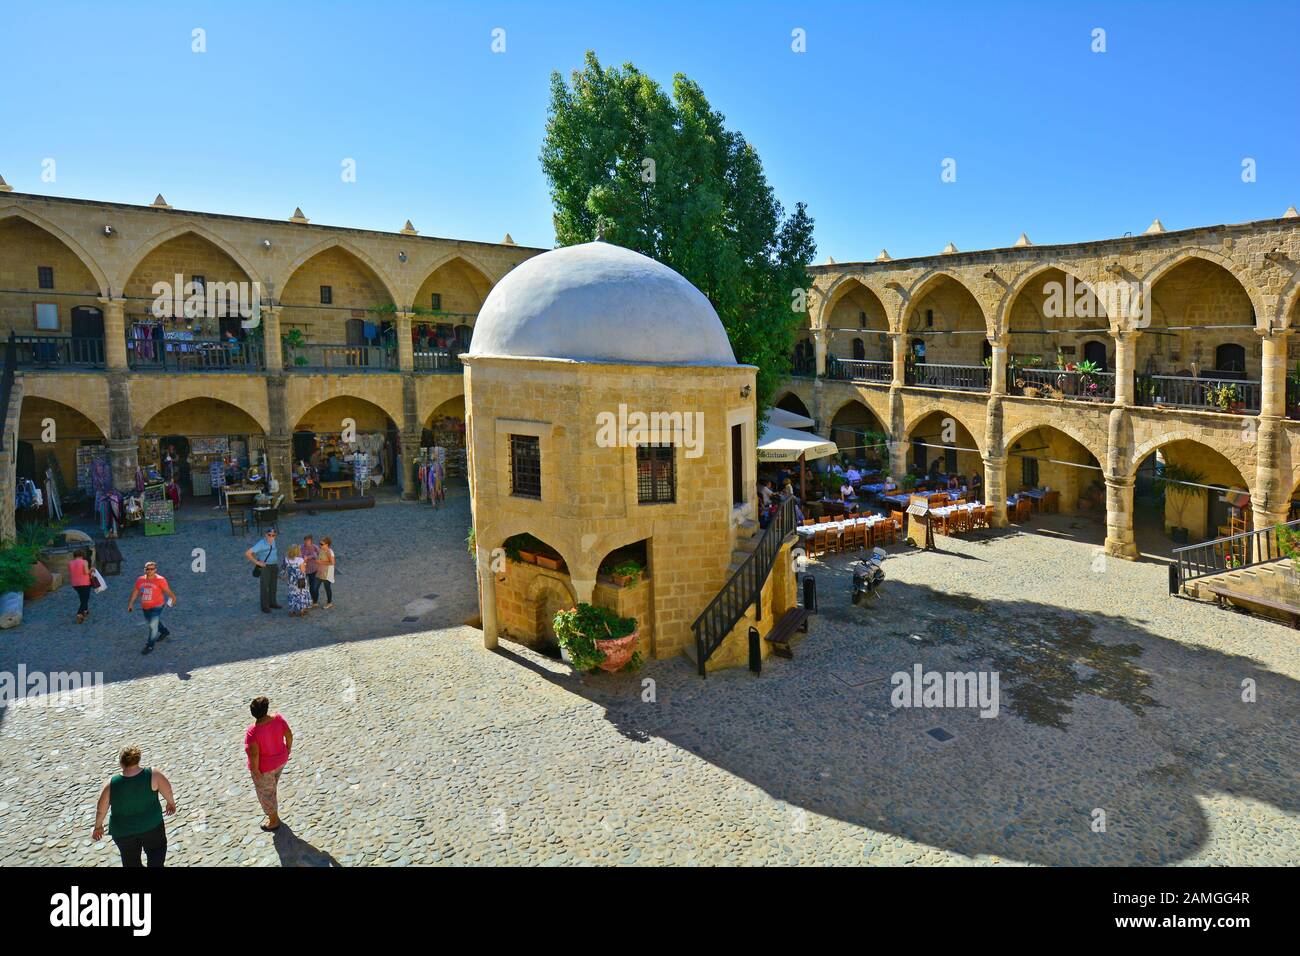 Nicosia, Cyprus - October 20th 2015: Unidentified people inside the Great Khan building aka Buyuk Han, former carvansery Stock Photo